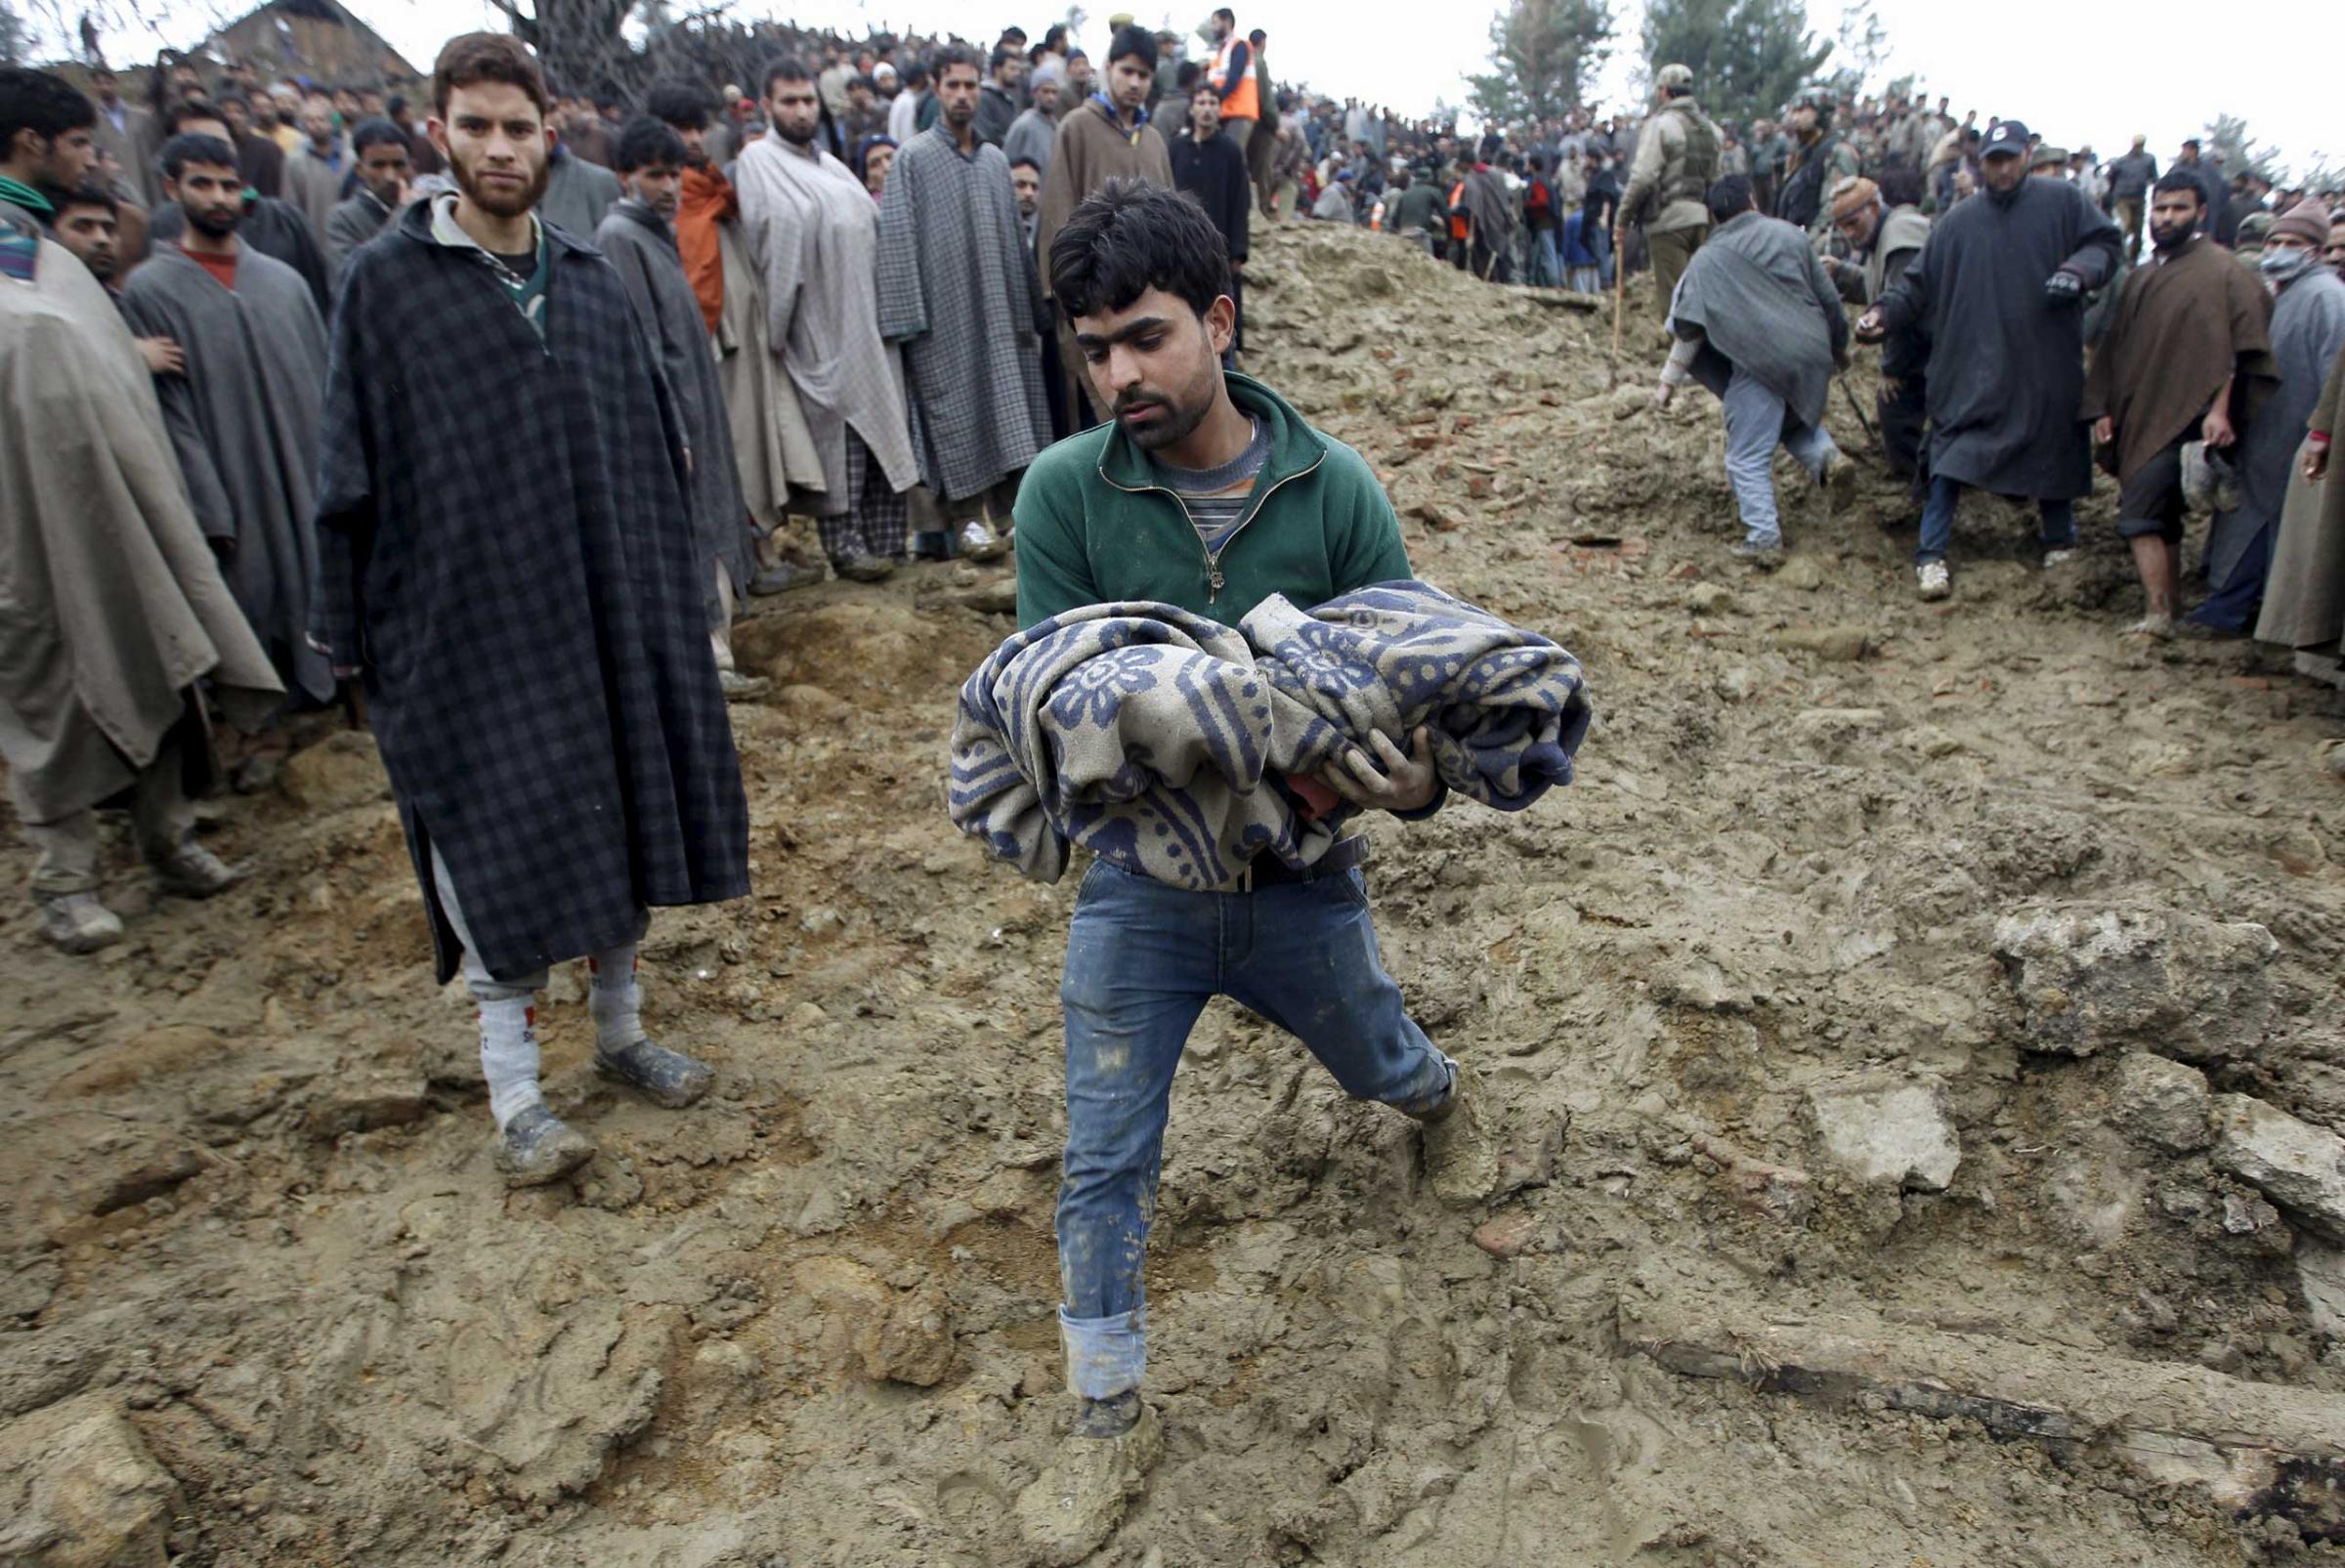 A Kashmiri man in the village of Laden carries the body of a child after it was pulled out from the rubble after a hillside collapsed onto a house on March 30, 2015.